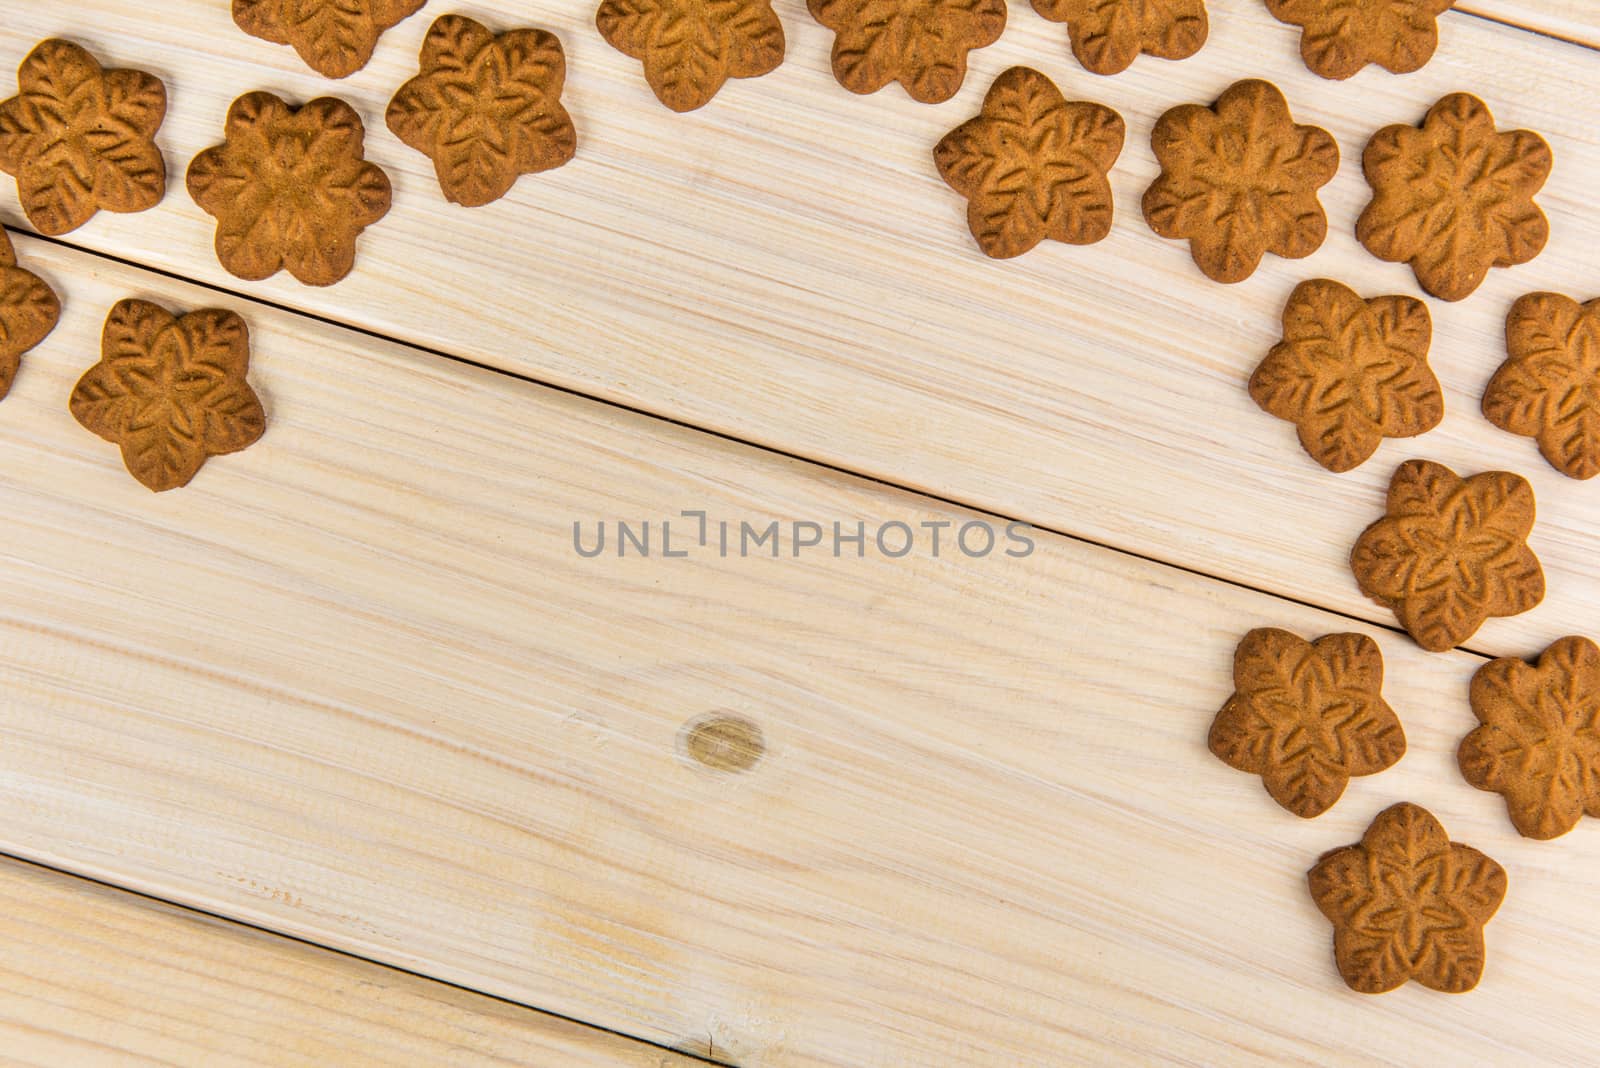 ?hristmas homemade gingerbread cookies on wooden background with empty copy space for your text.